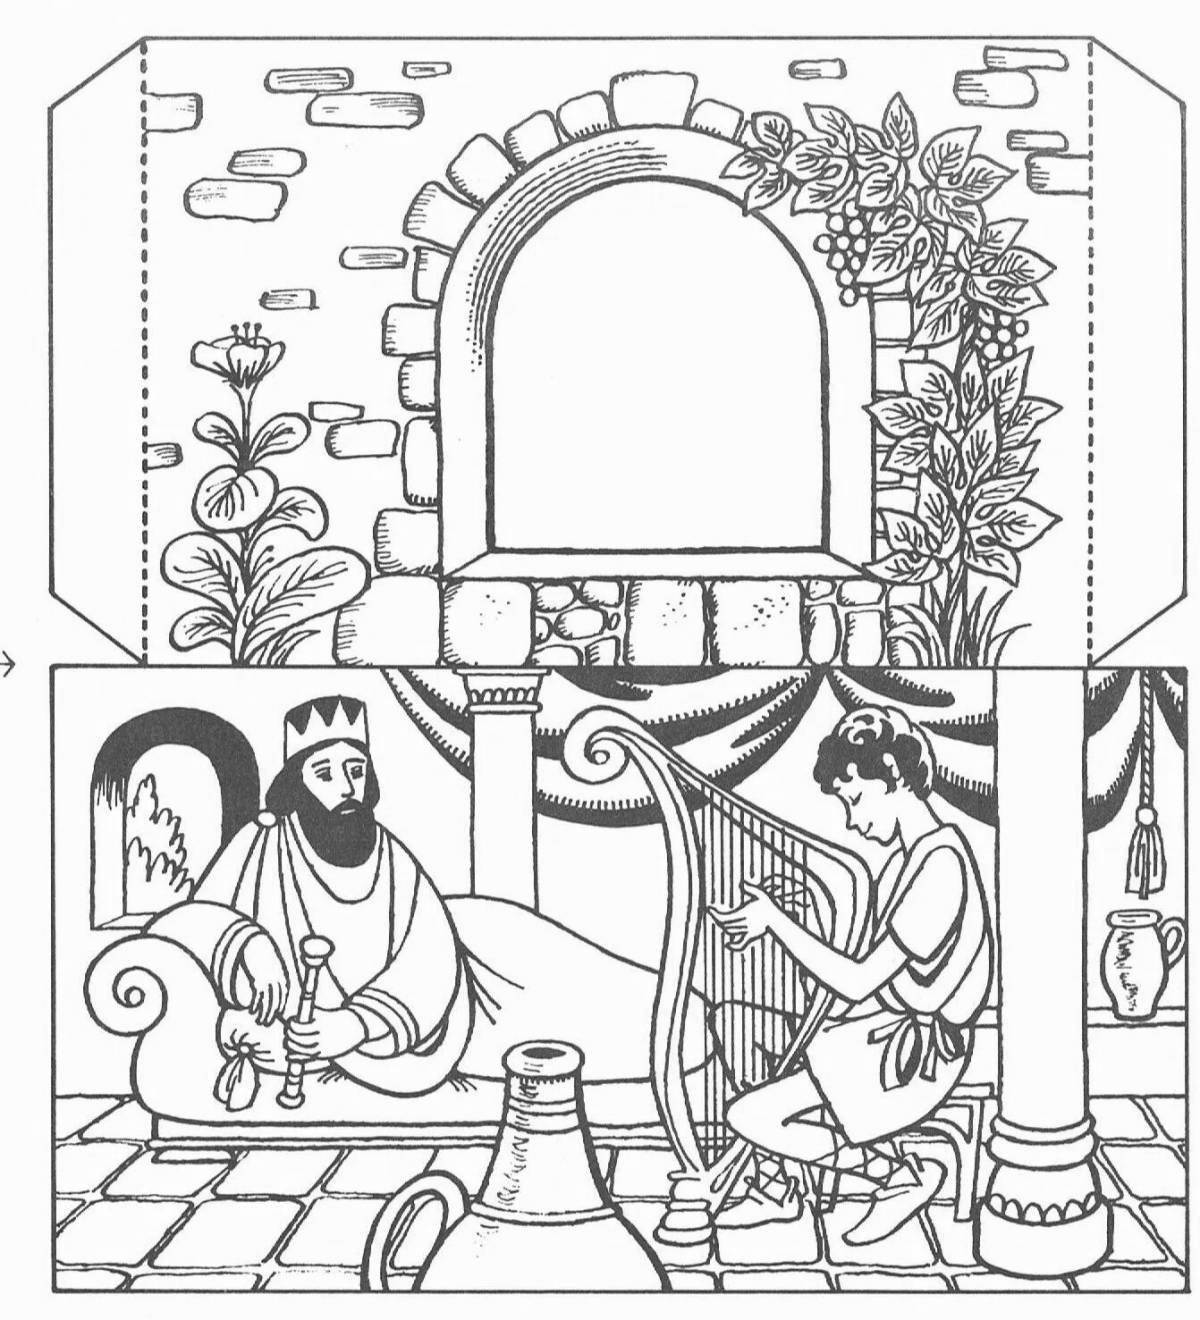 Funny Sunday school coloring book